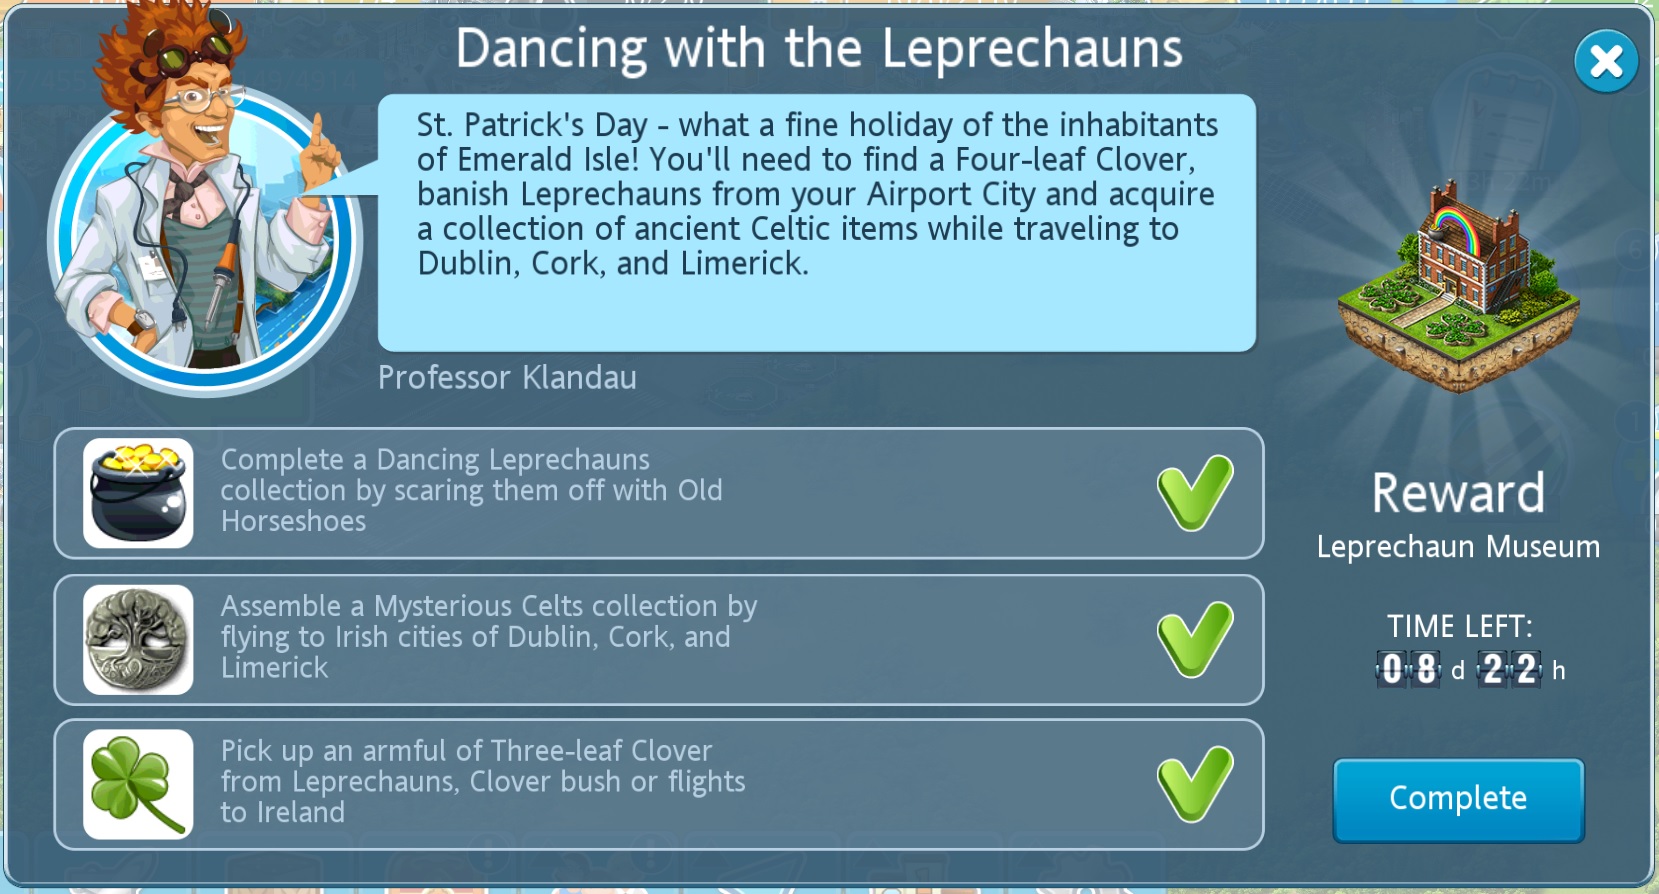 Dancing with the leprechauns 3.2018.jpg